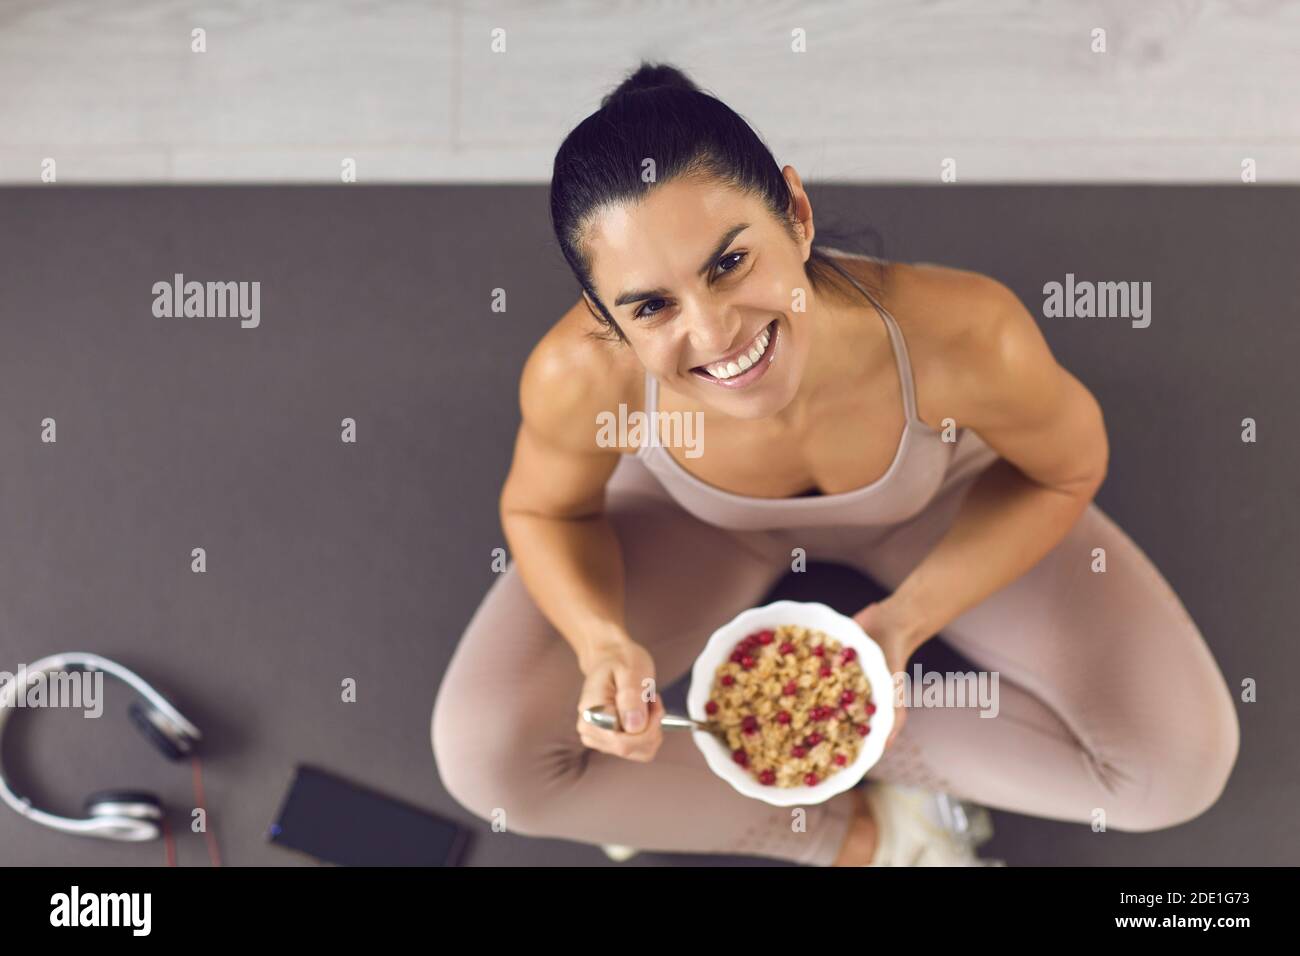 Happy fit woman sitting on a sports mat and enjoying healthy berry oatmeal muesli Stock Photo